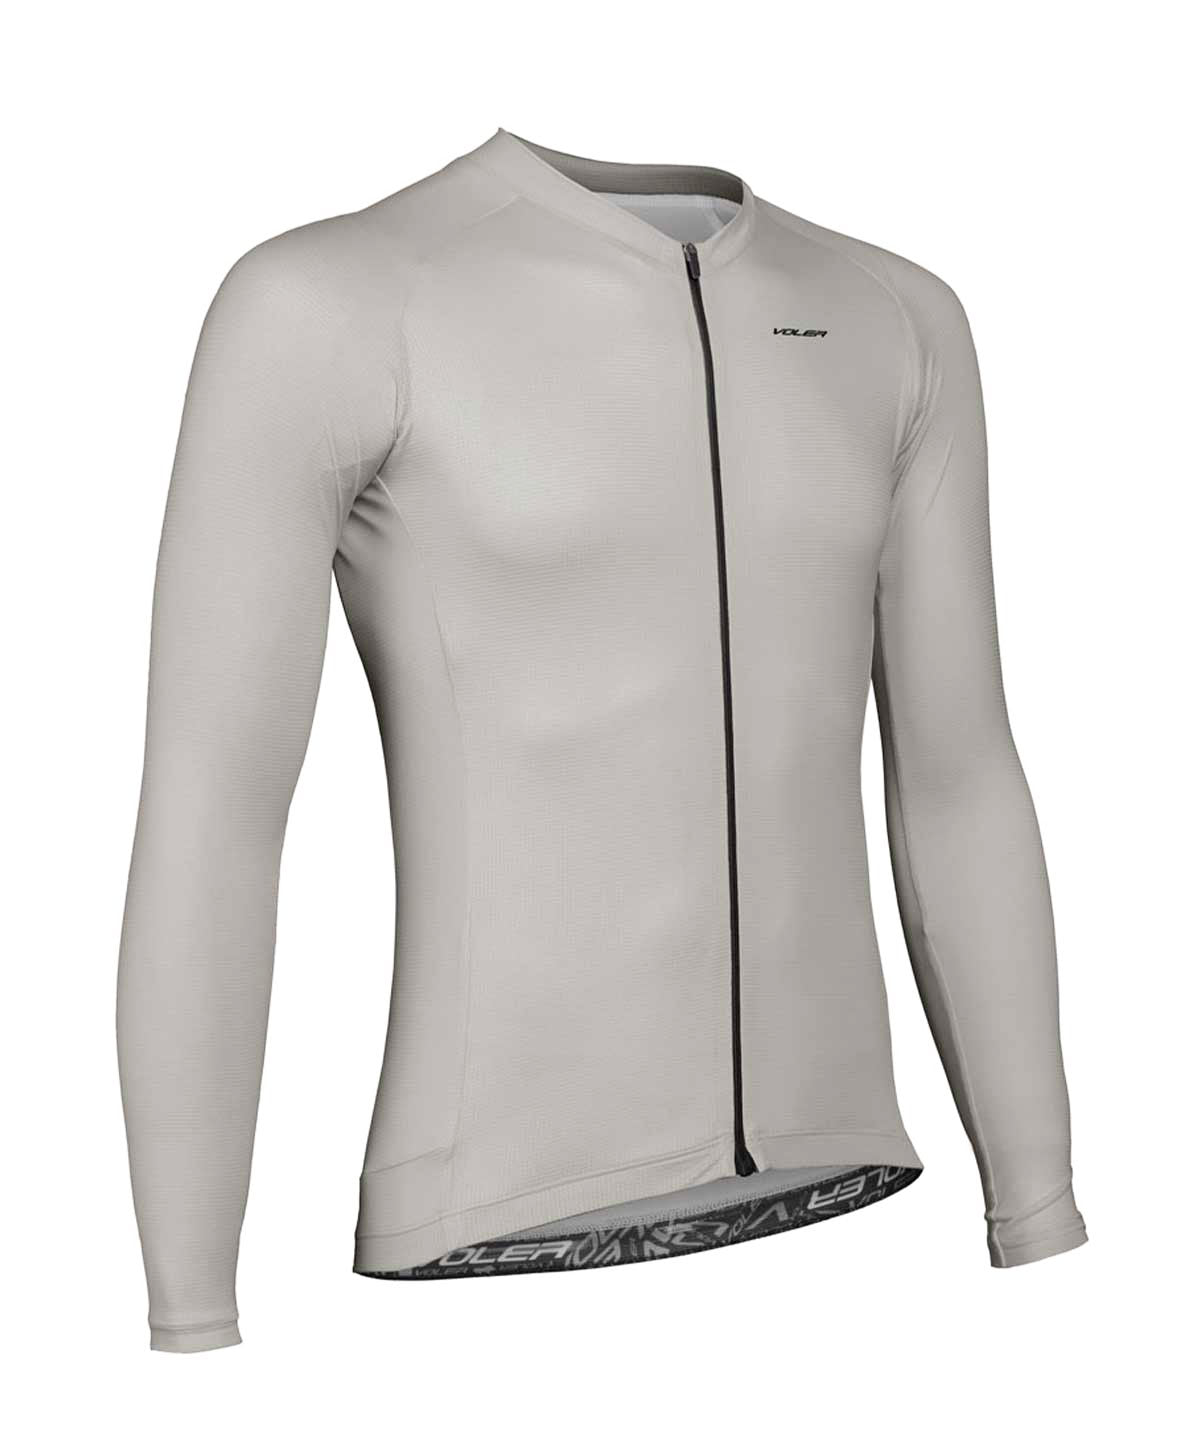 M. VELOCITY AIR LS JERSEY - SOLID